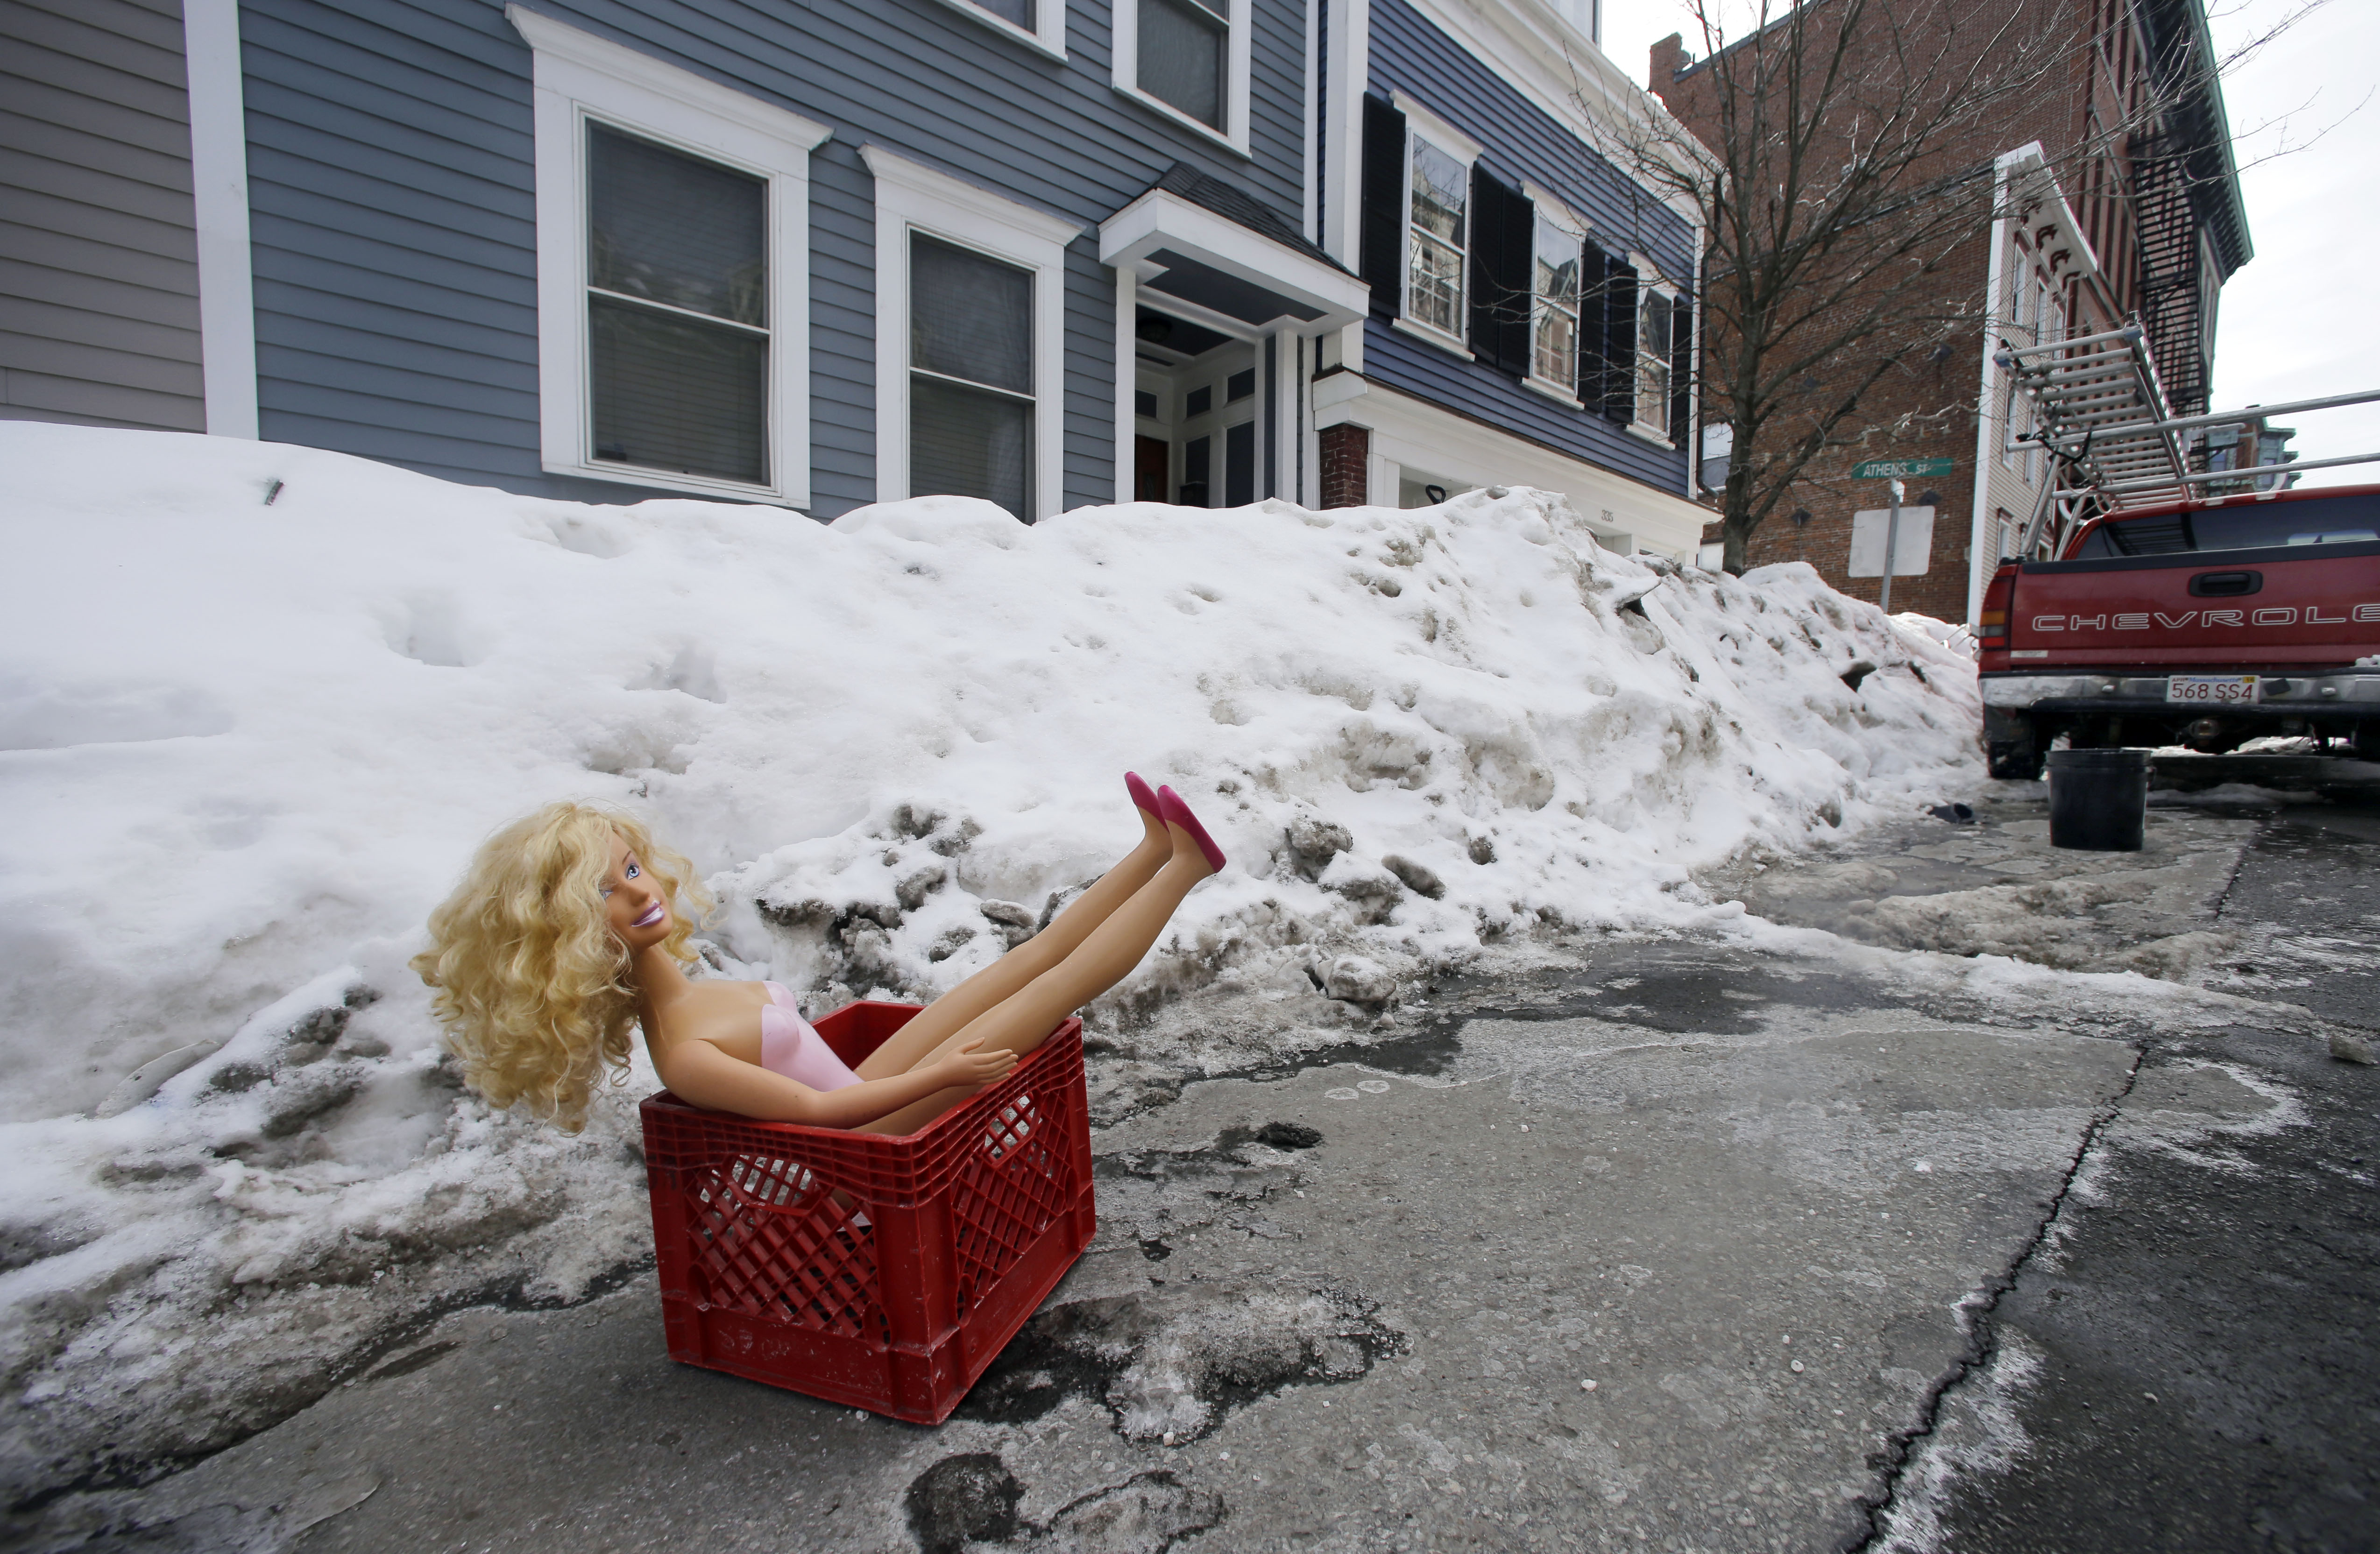 In this Feb. 23, 2015 photo, a fashion doll in a milk crate saves a parking space on a residential street in South Boston. Officials typically turn a blind eye to the lawn chairs, orange cones and assorted bric-a-brac Bostonians use to reserve a parking space after clearing it of snow. That ends Monday, March 2, 2015, with an order from City Hall to remove space savers, reigniting the ugly parking wars that have pitted neighbor against neighbor. (AP Photo/Elise Amendola)